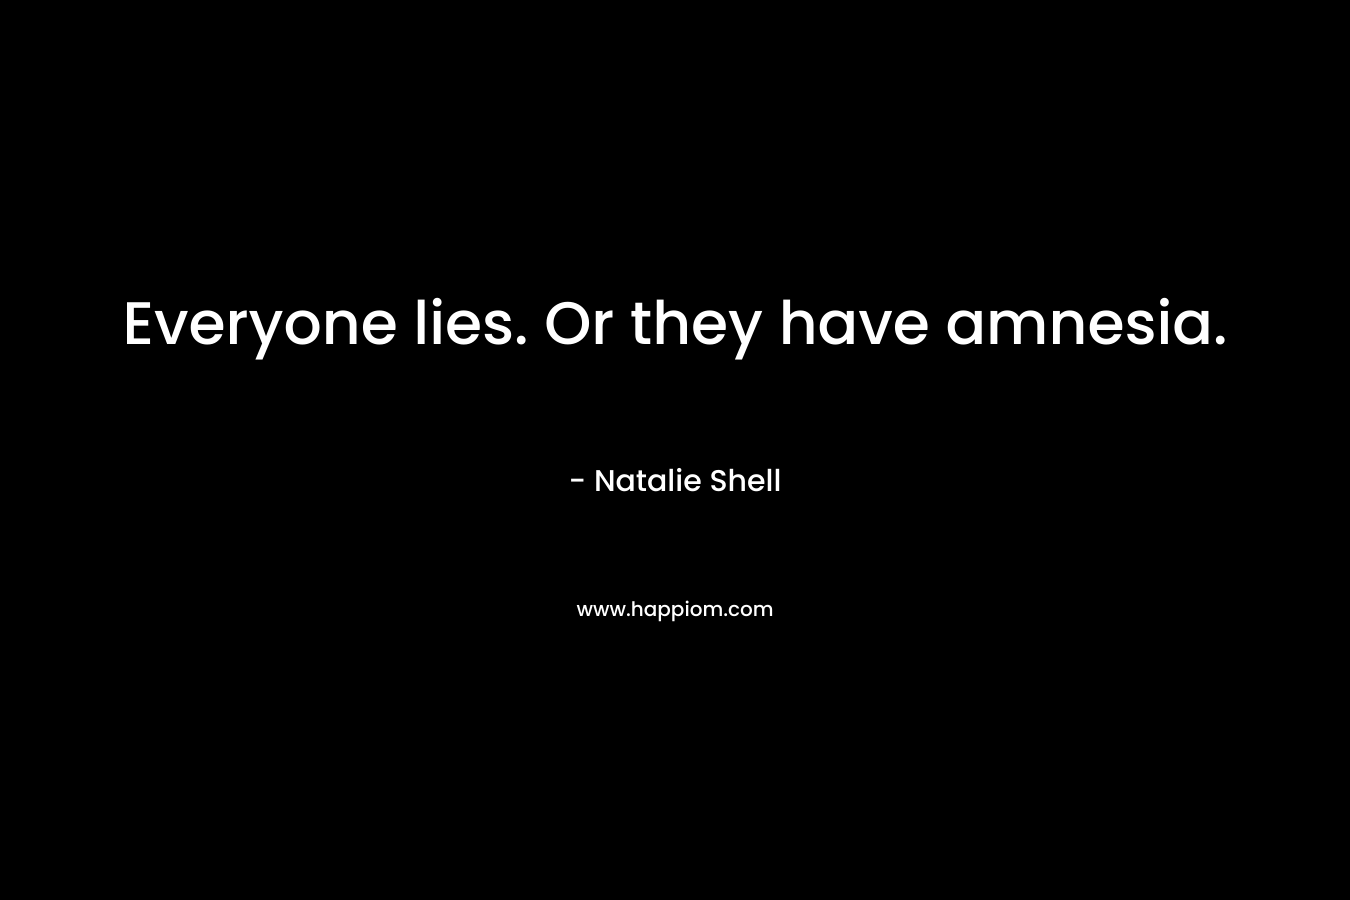 Everyone lies. Or they have amnesia.